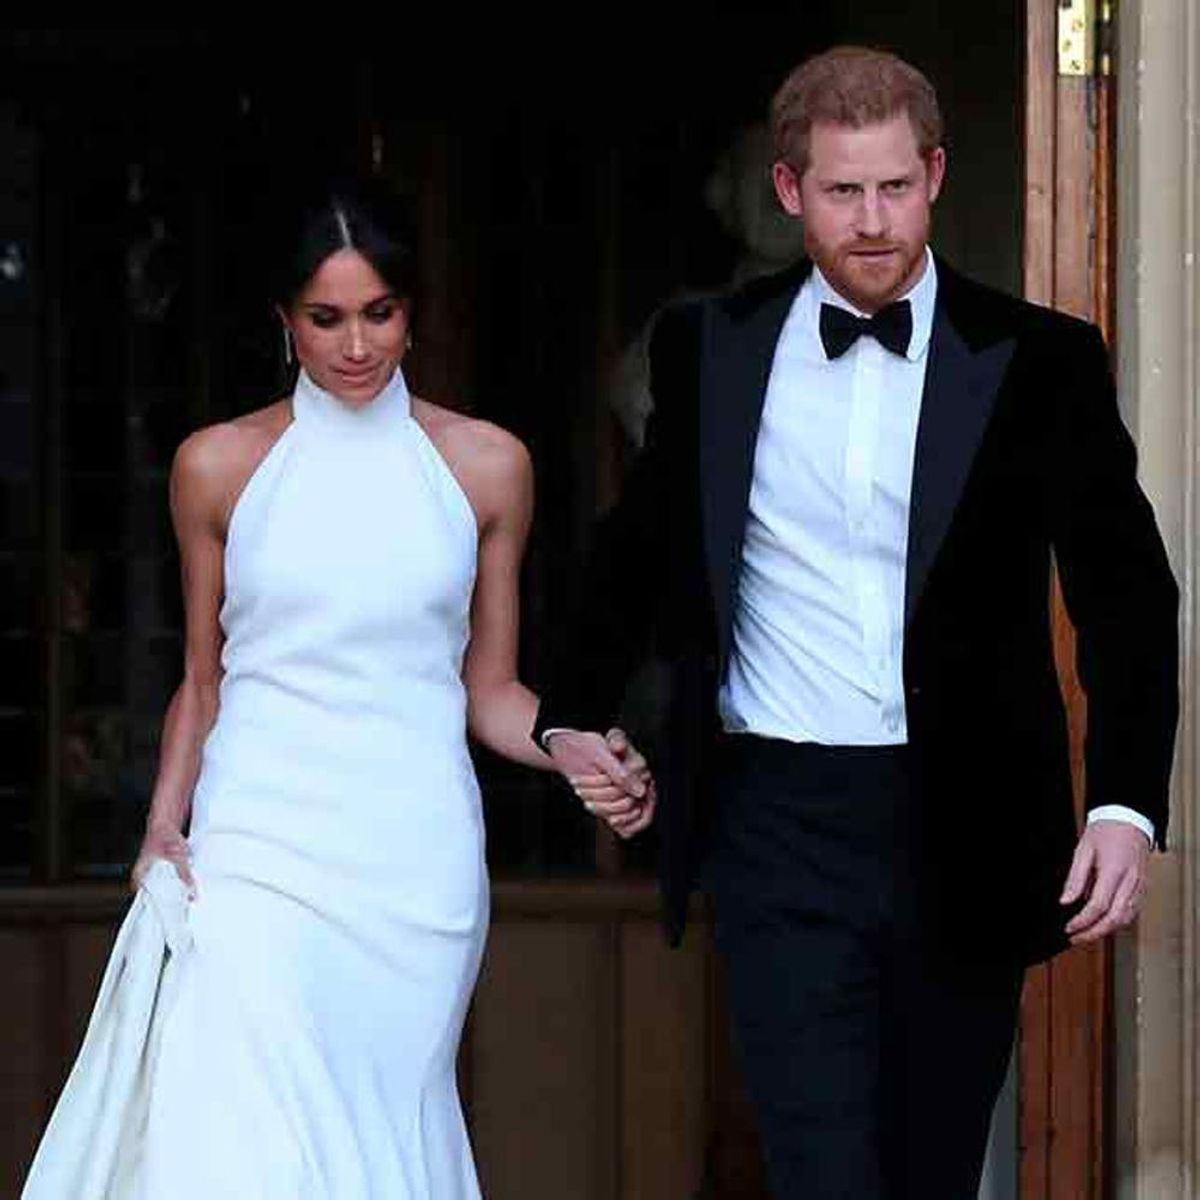 You Can Now Buy Meghan Markle’s Second Wedding Dress (Sort Of)